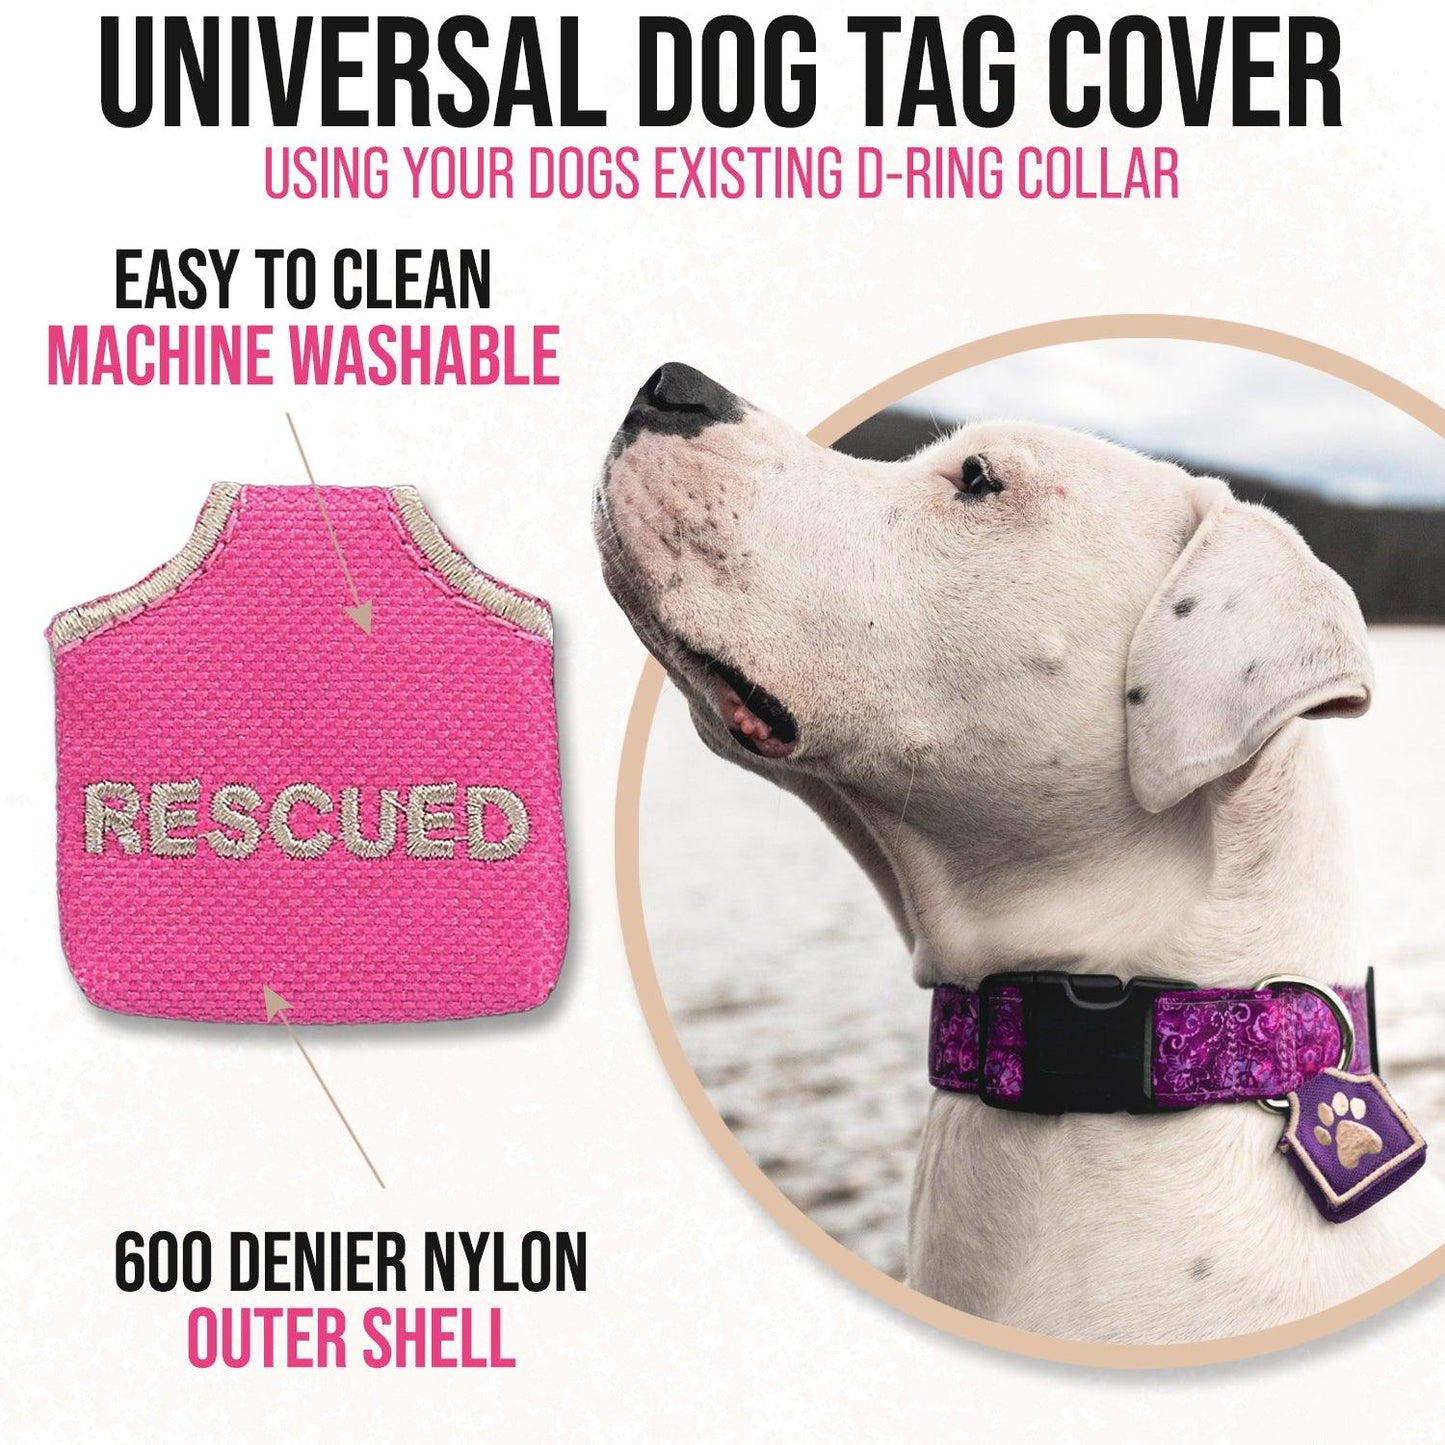 Pink dog tag silencer and while dog with purple pet tag cover